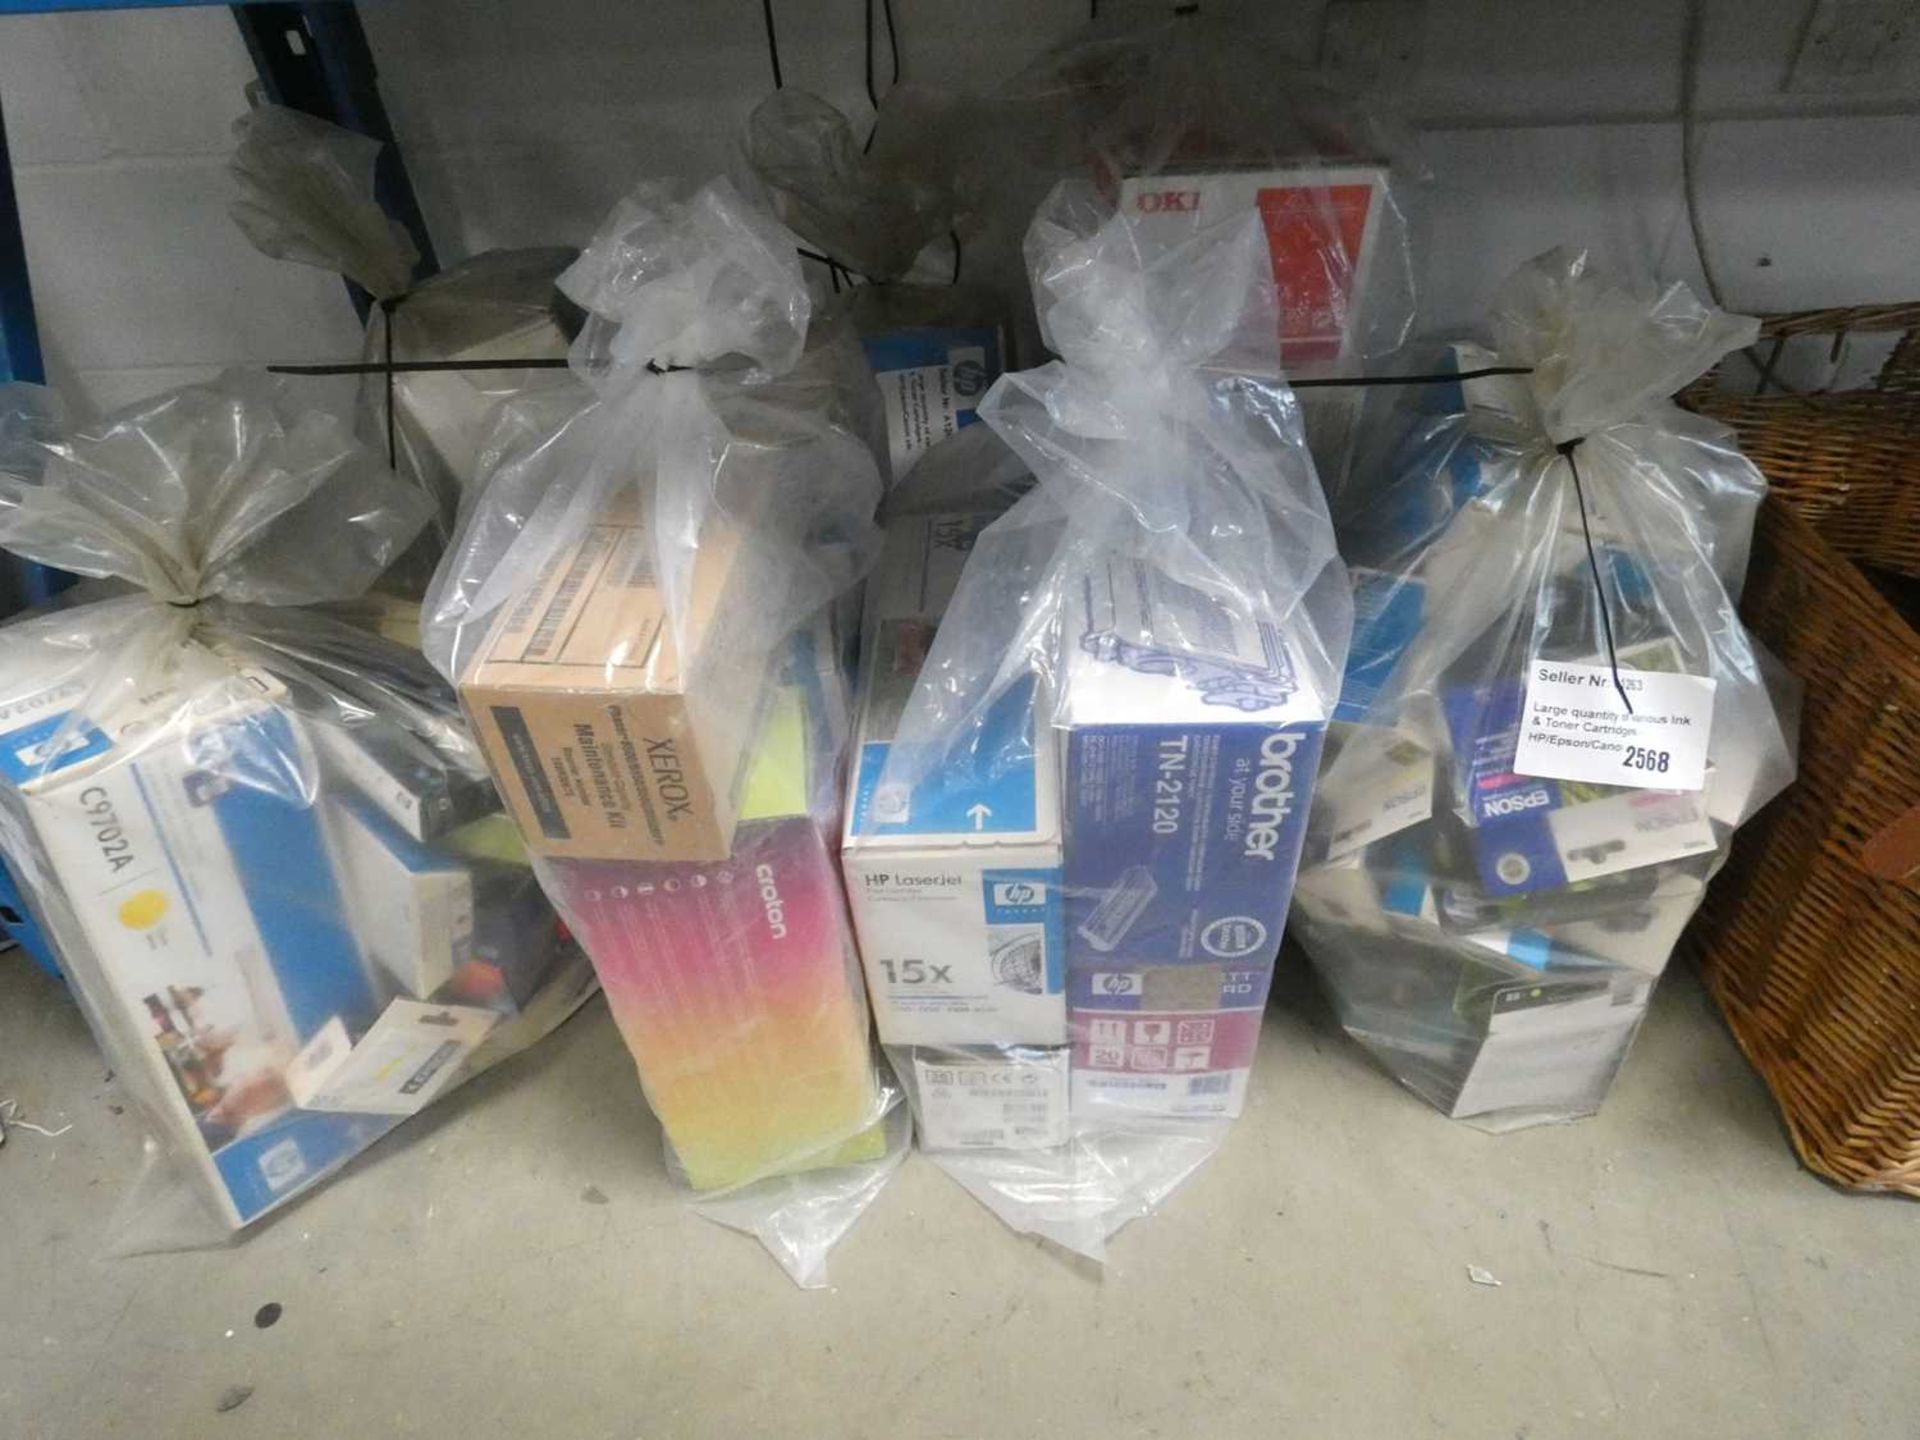 7 various bags containing wide selection of toner and printer ink cartridges